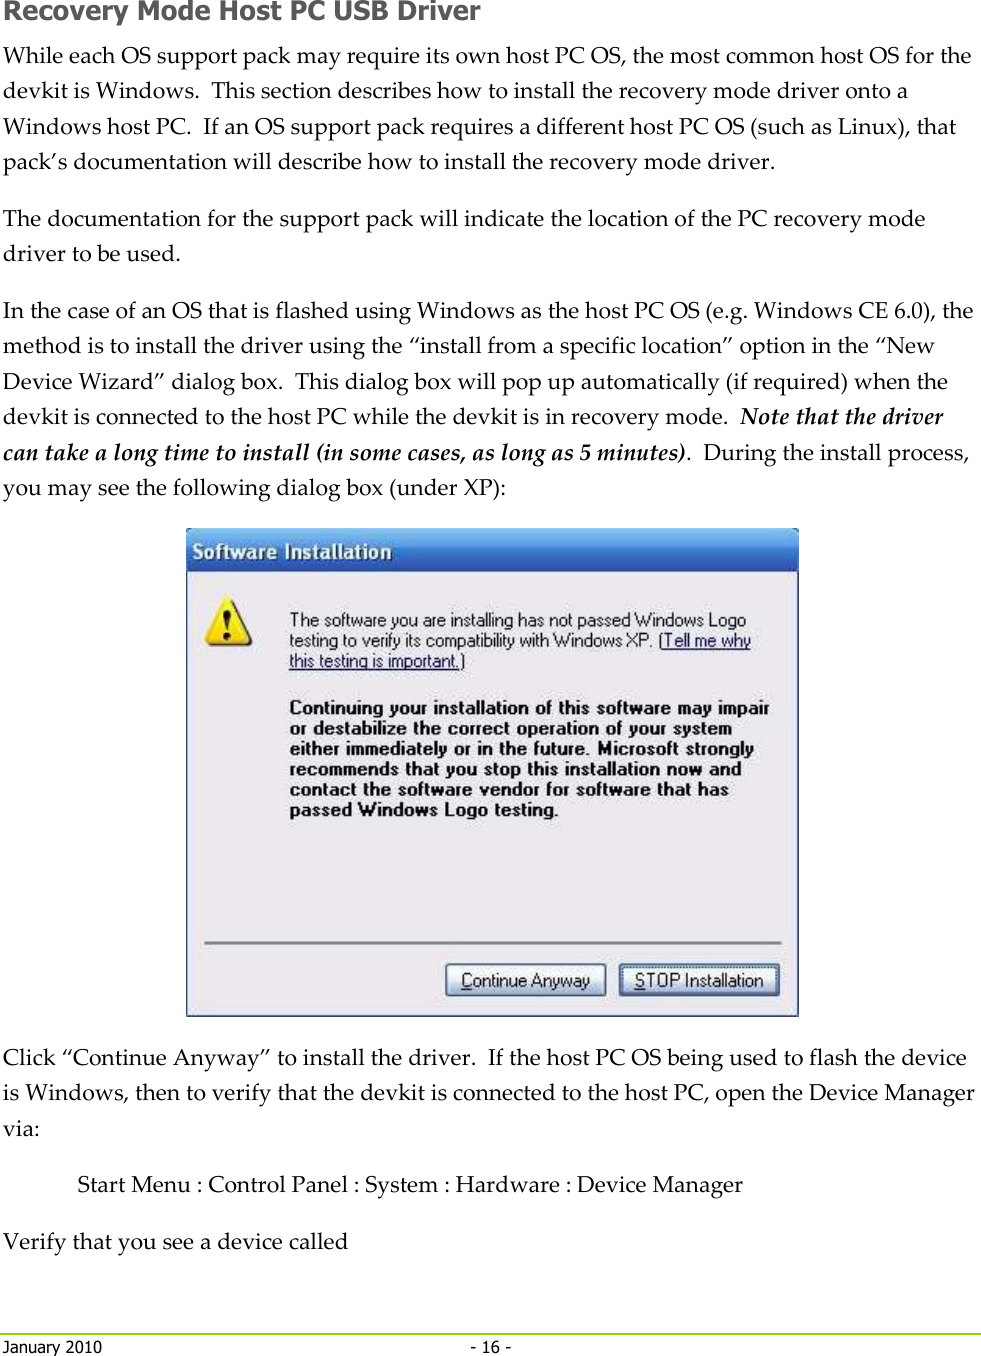     January 2010  - 16 -   Recovery Mode Host PC USB Driver While each OS support pack may require its own host PC OS, the most common host OS for the devkit is Windows.  This section describes how to install the recovery mode driver onto a Windows host PC.  If an OS support pack requires a different host PC OS (such as Linux), that pack’s documentation will describe how to install the recovery mode driver. The documentation for the support pack will indicate the location of the PC recovery mode driver to be used. In the case of an OS that is flashed using Windows as the host PC OS (e.g. Windows CE 6.0), the method is to install the driver using the “install from a specific location” option in the “New Device Wizard” dialog box.  This dialog box will pop up automatically (if required) when the devkit is connected to the host PC while the devkit is in recovery mode.  Note that the driver can take a long time to install (in some cases, as long as 5 minutes).  During the install process, you may see the following dialog box (under XP):  Click “Continue Anyway” to install the driver.  If the host PC OS being used to flash the device is Windows, then to verify that the devkit is connected to the host PC, open the Device Manager via: Start Menu : Control Panel : System : Hardware : Device Manager Verify that you see a device called  